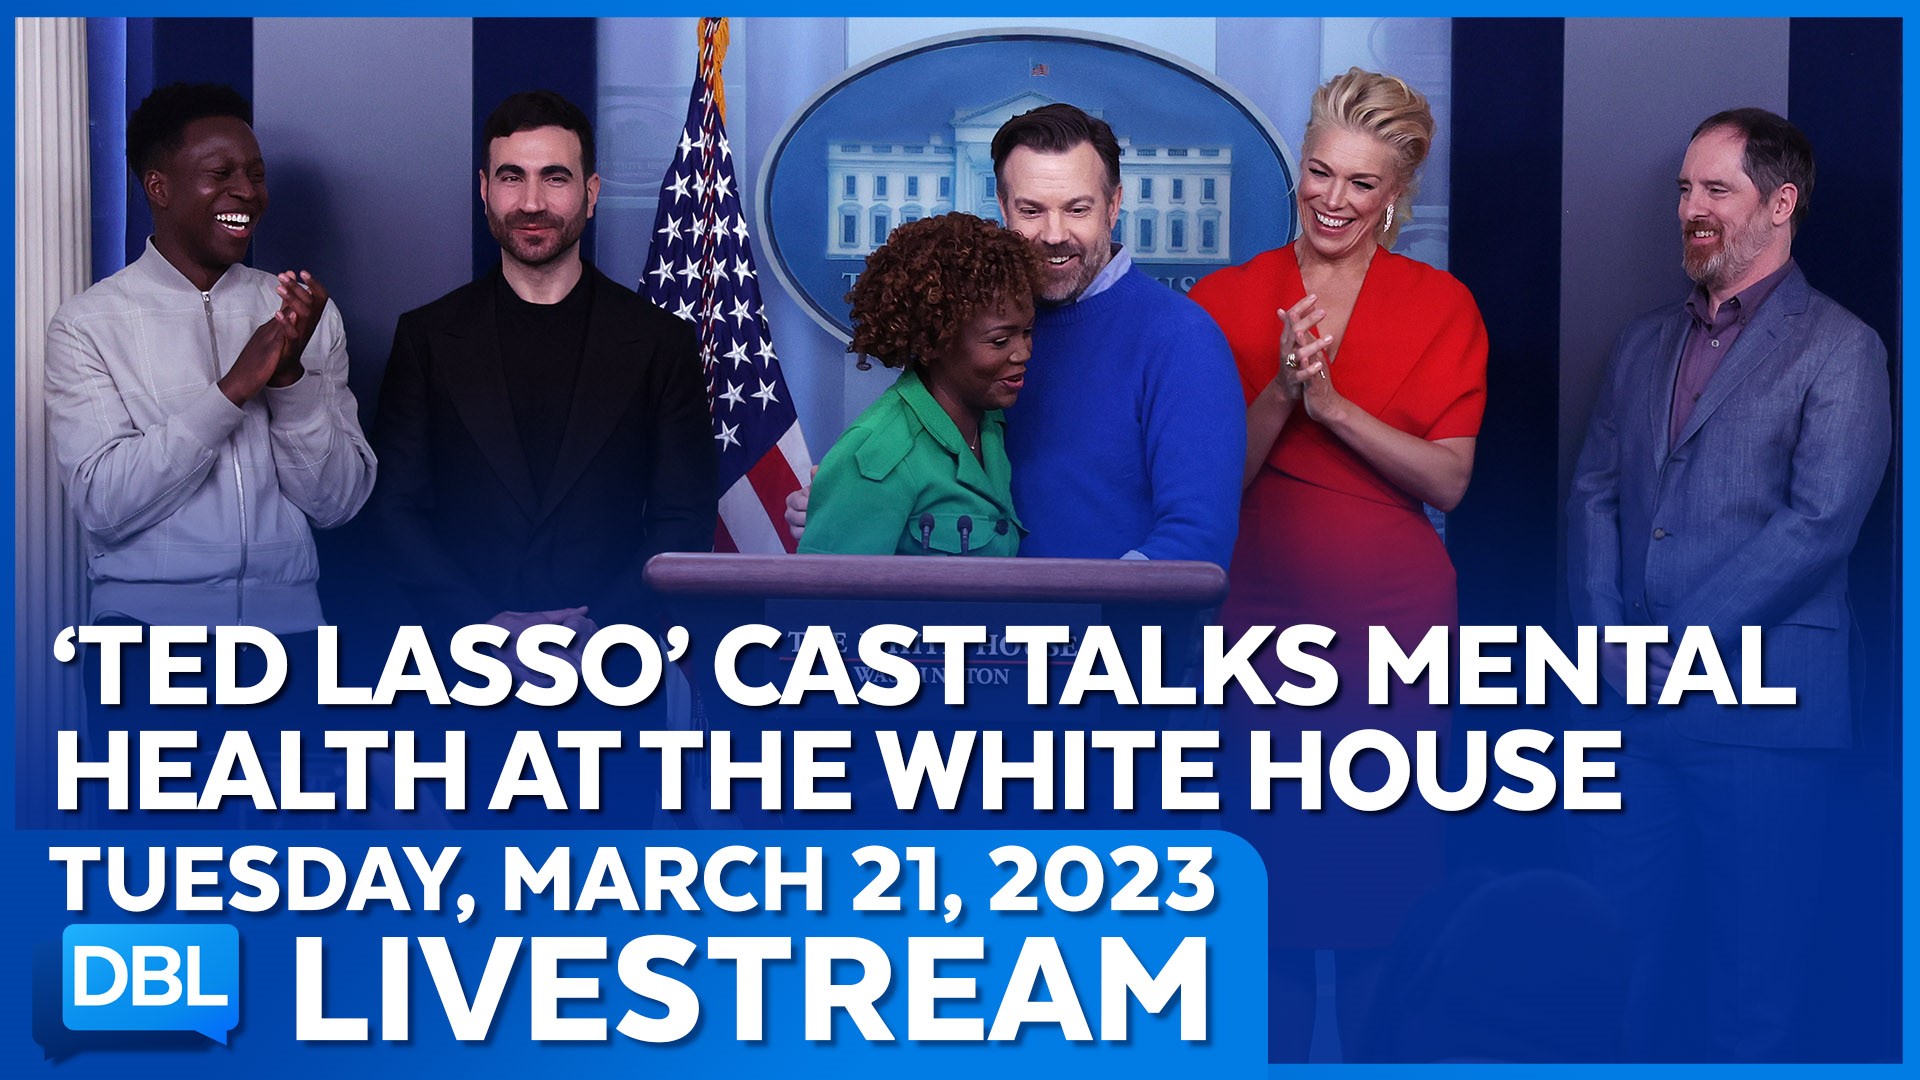 The 'Ted Lasso' cast visits the White House to talk mental health; Dr. Kohli talks ayahusca; The teacher shot by a 6-year-old breaks her silence.